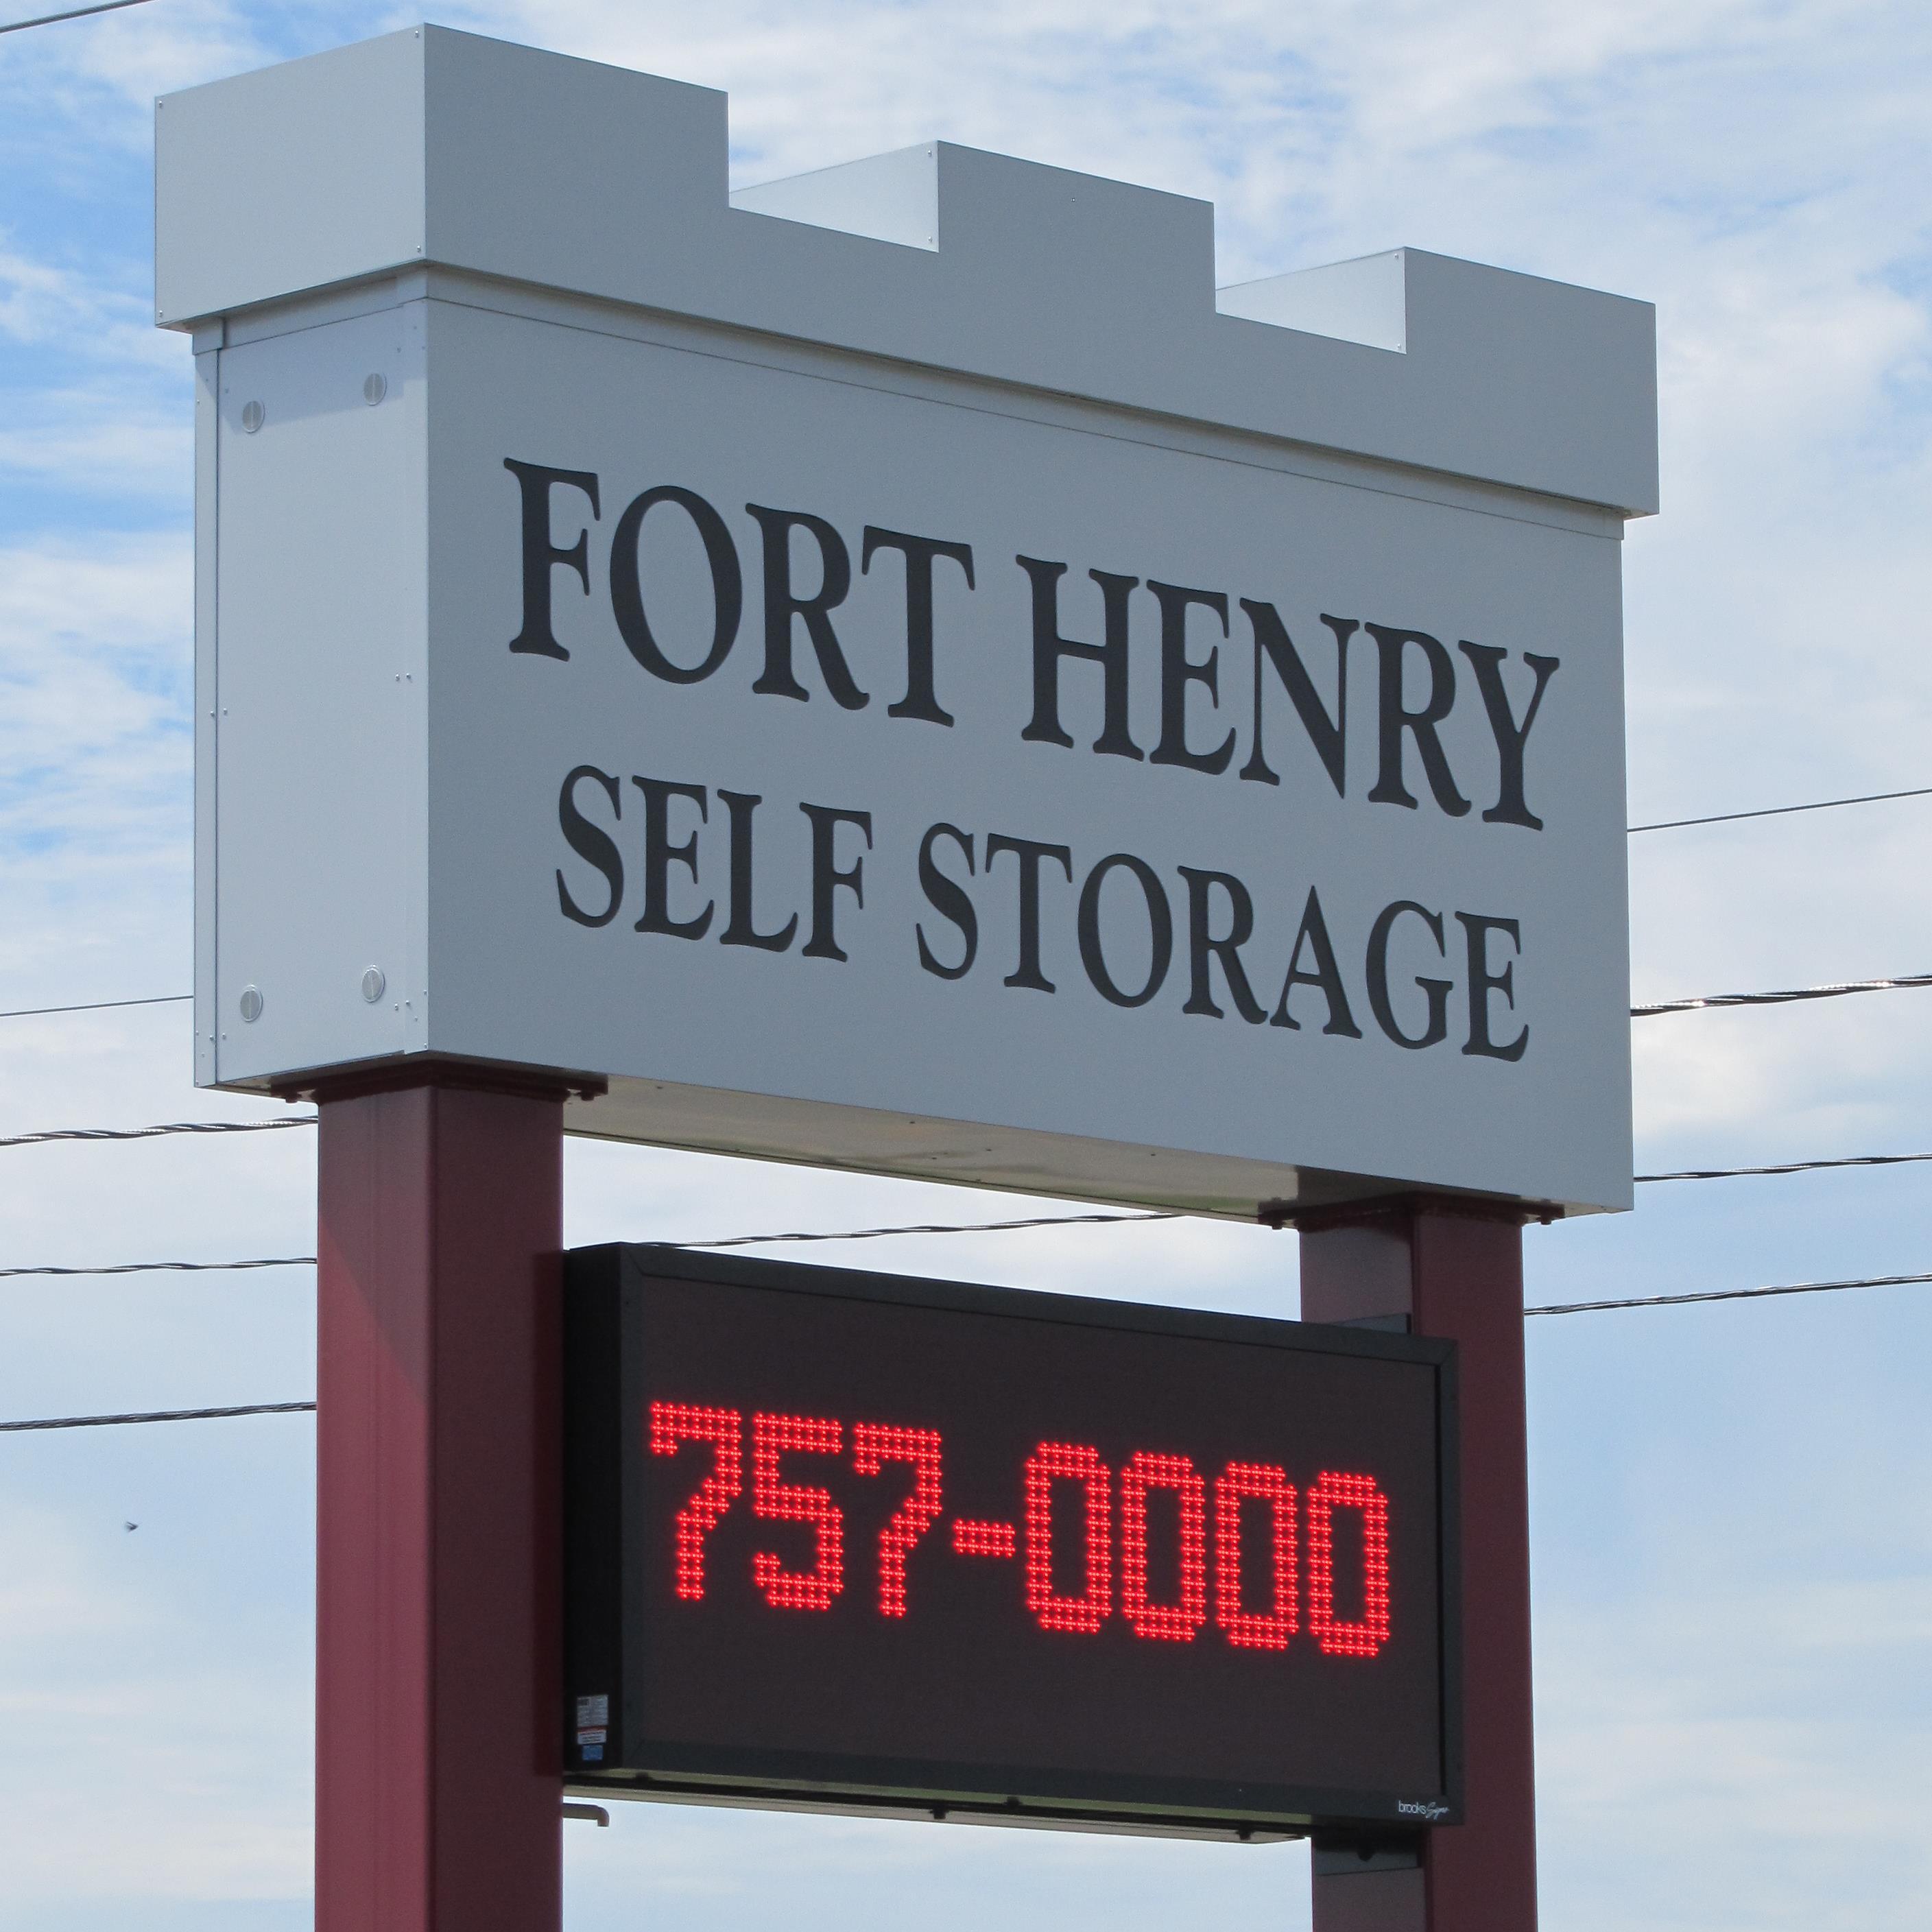 Self Storage  - Family Owned Business!